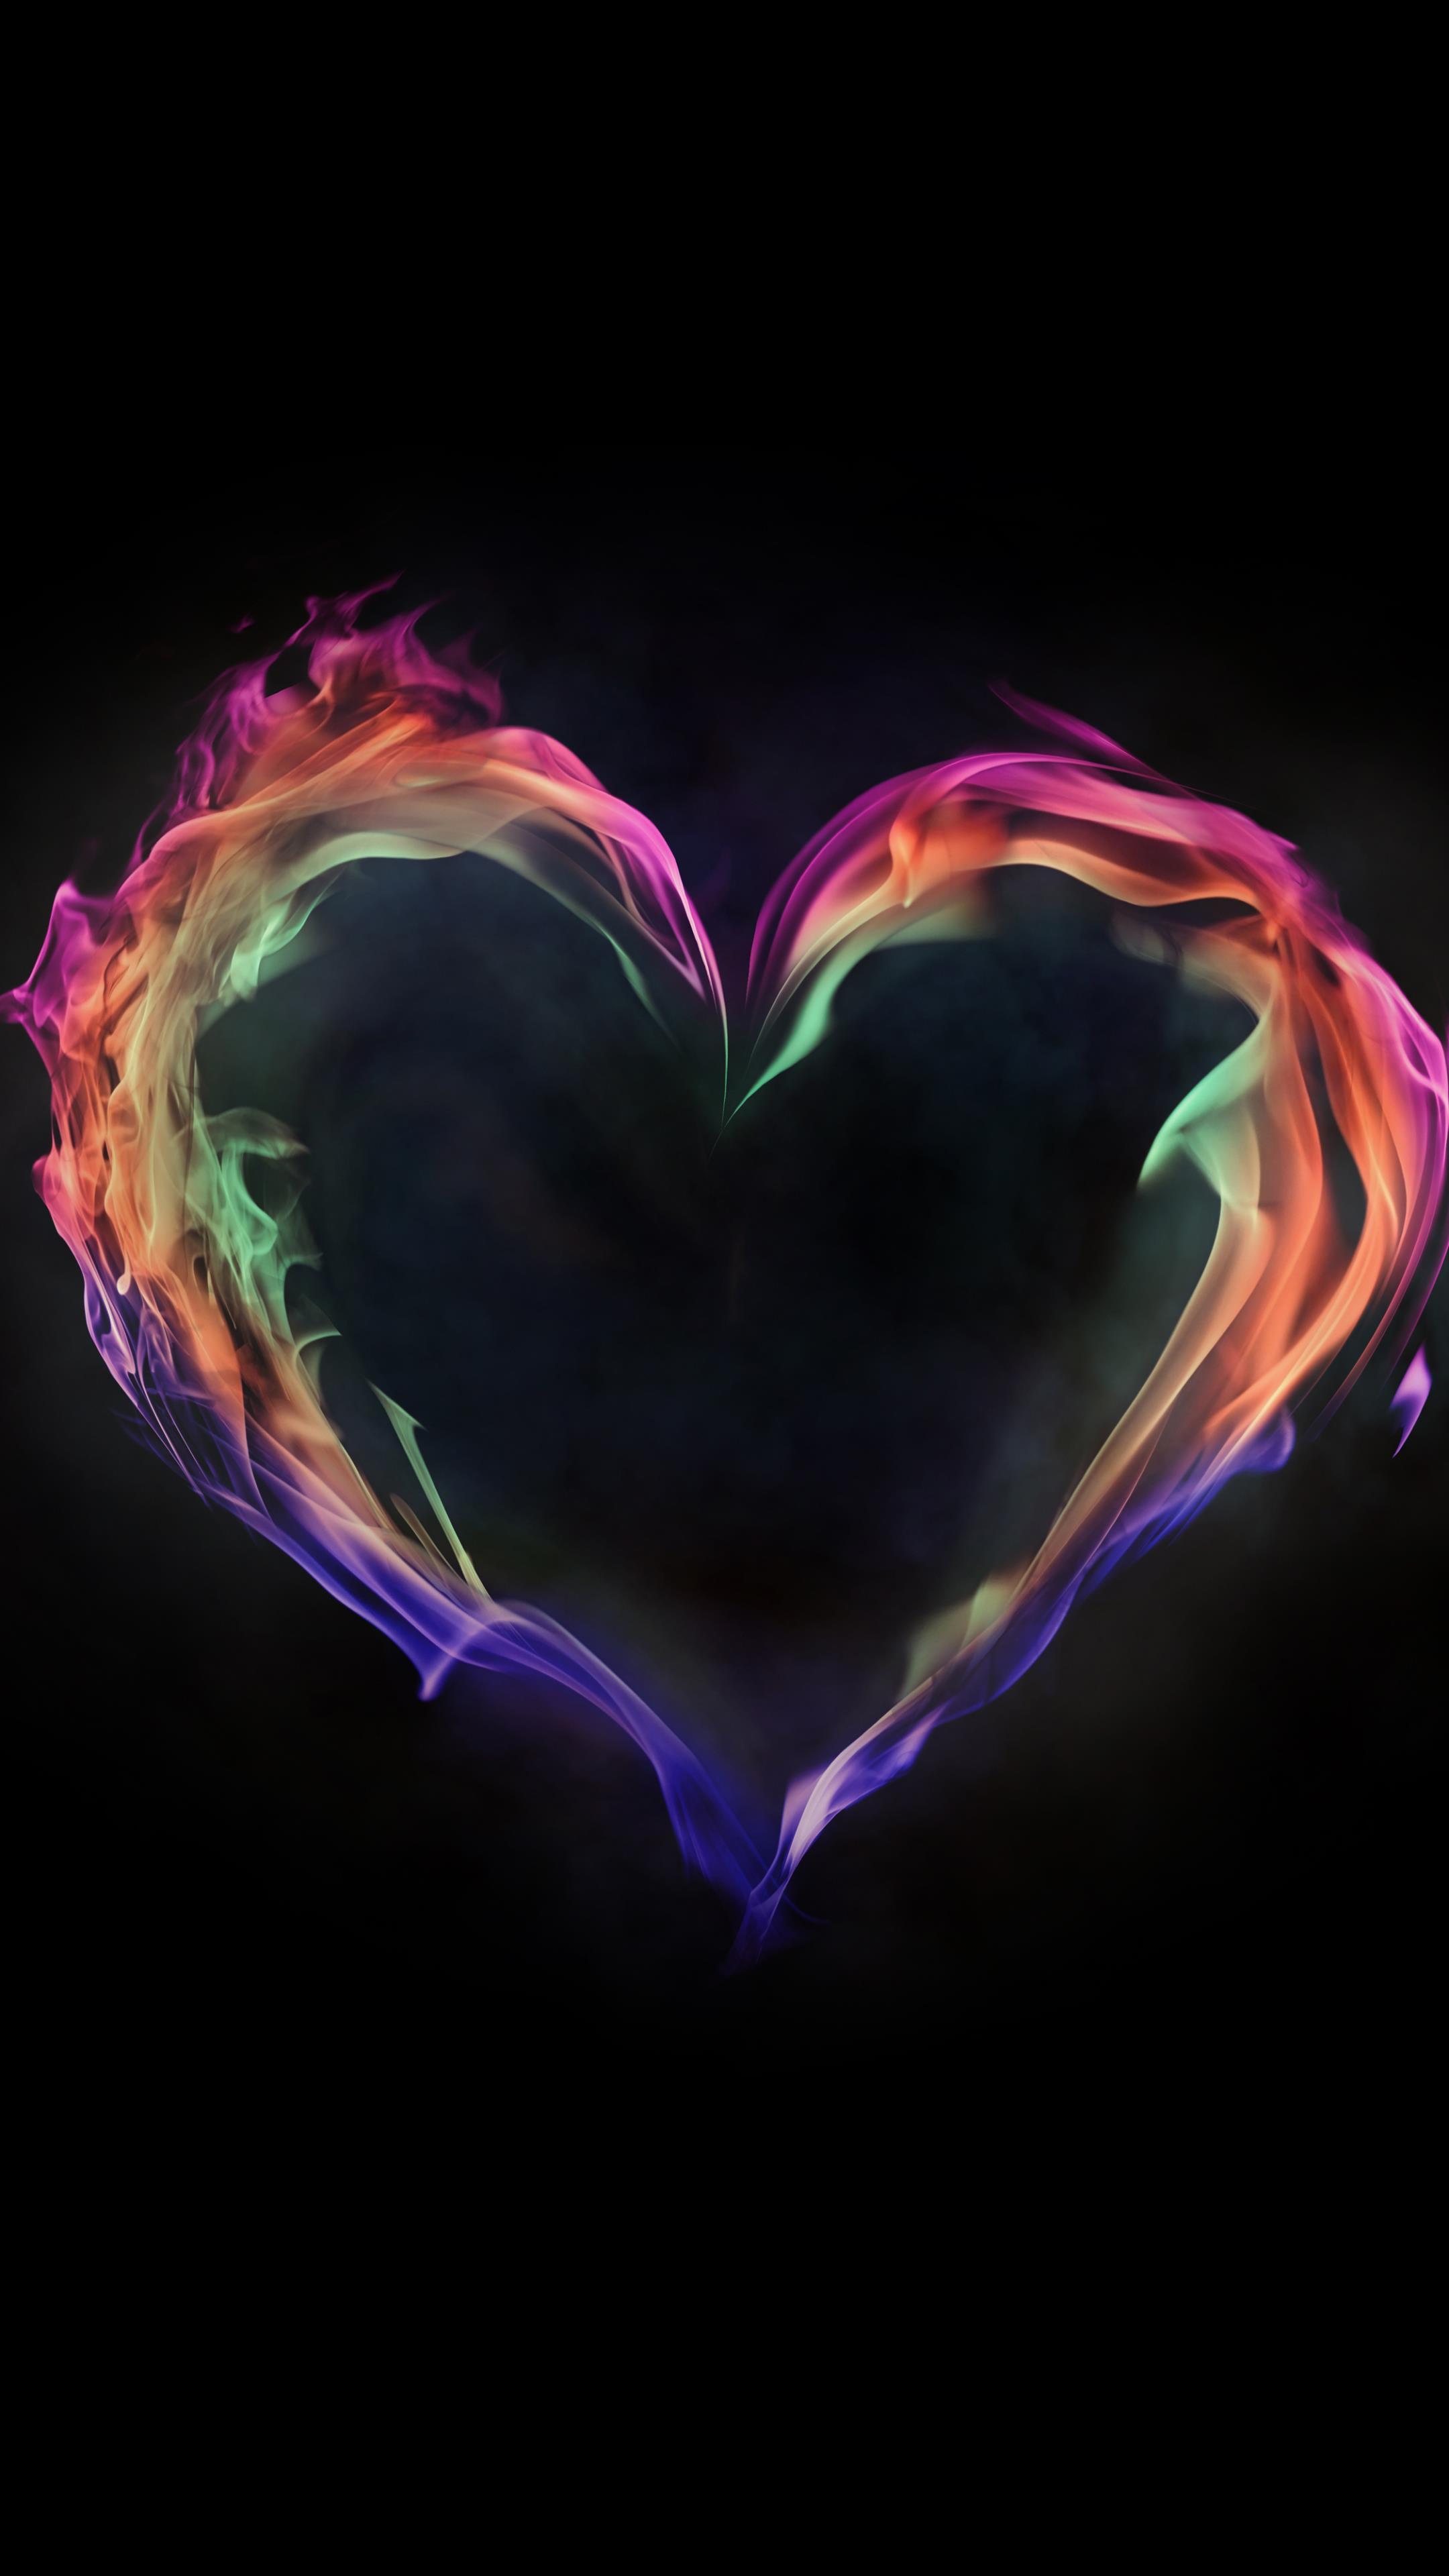 Colorful Heart Wallpaper Images  Free Download on Freepik